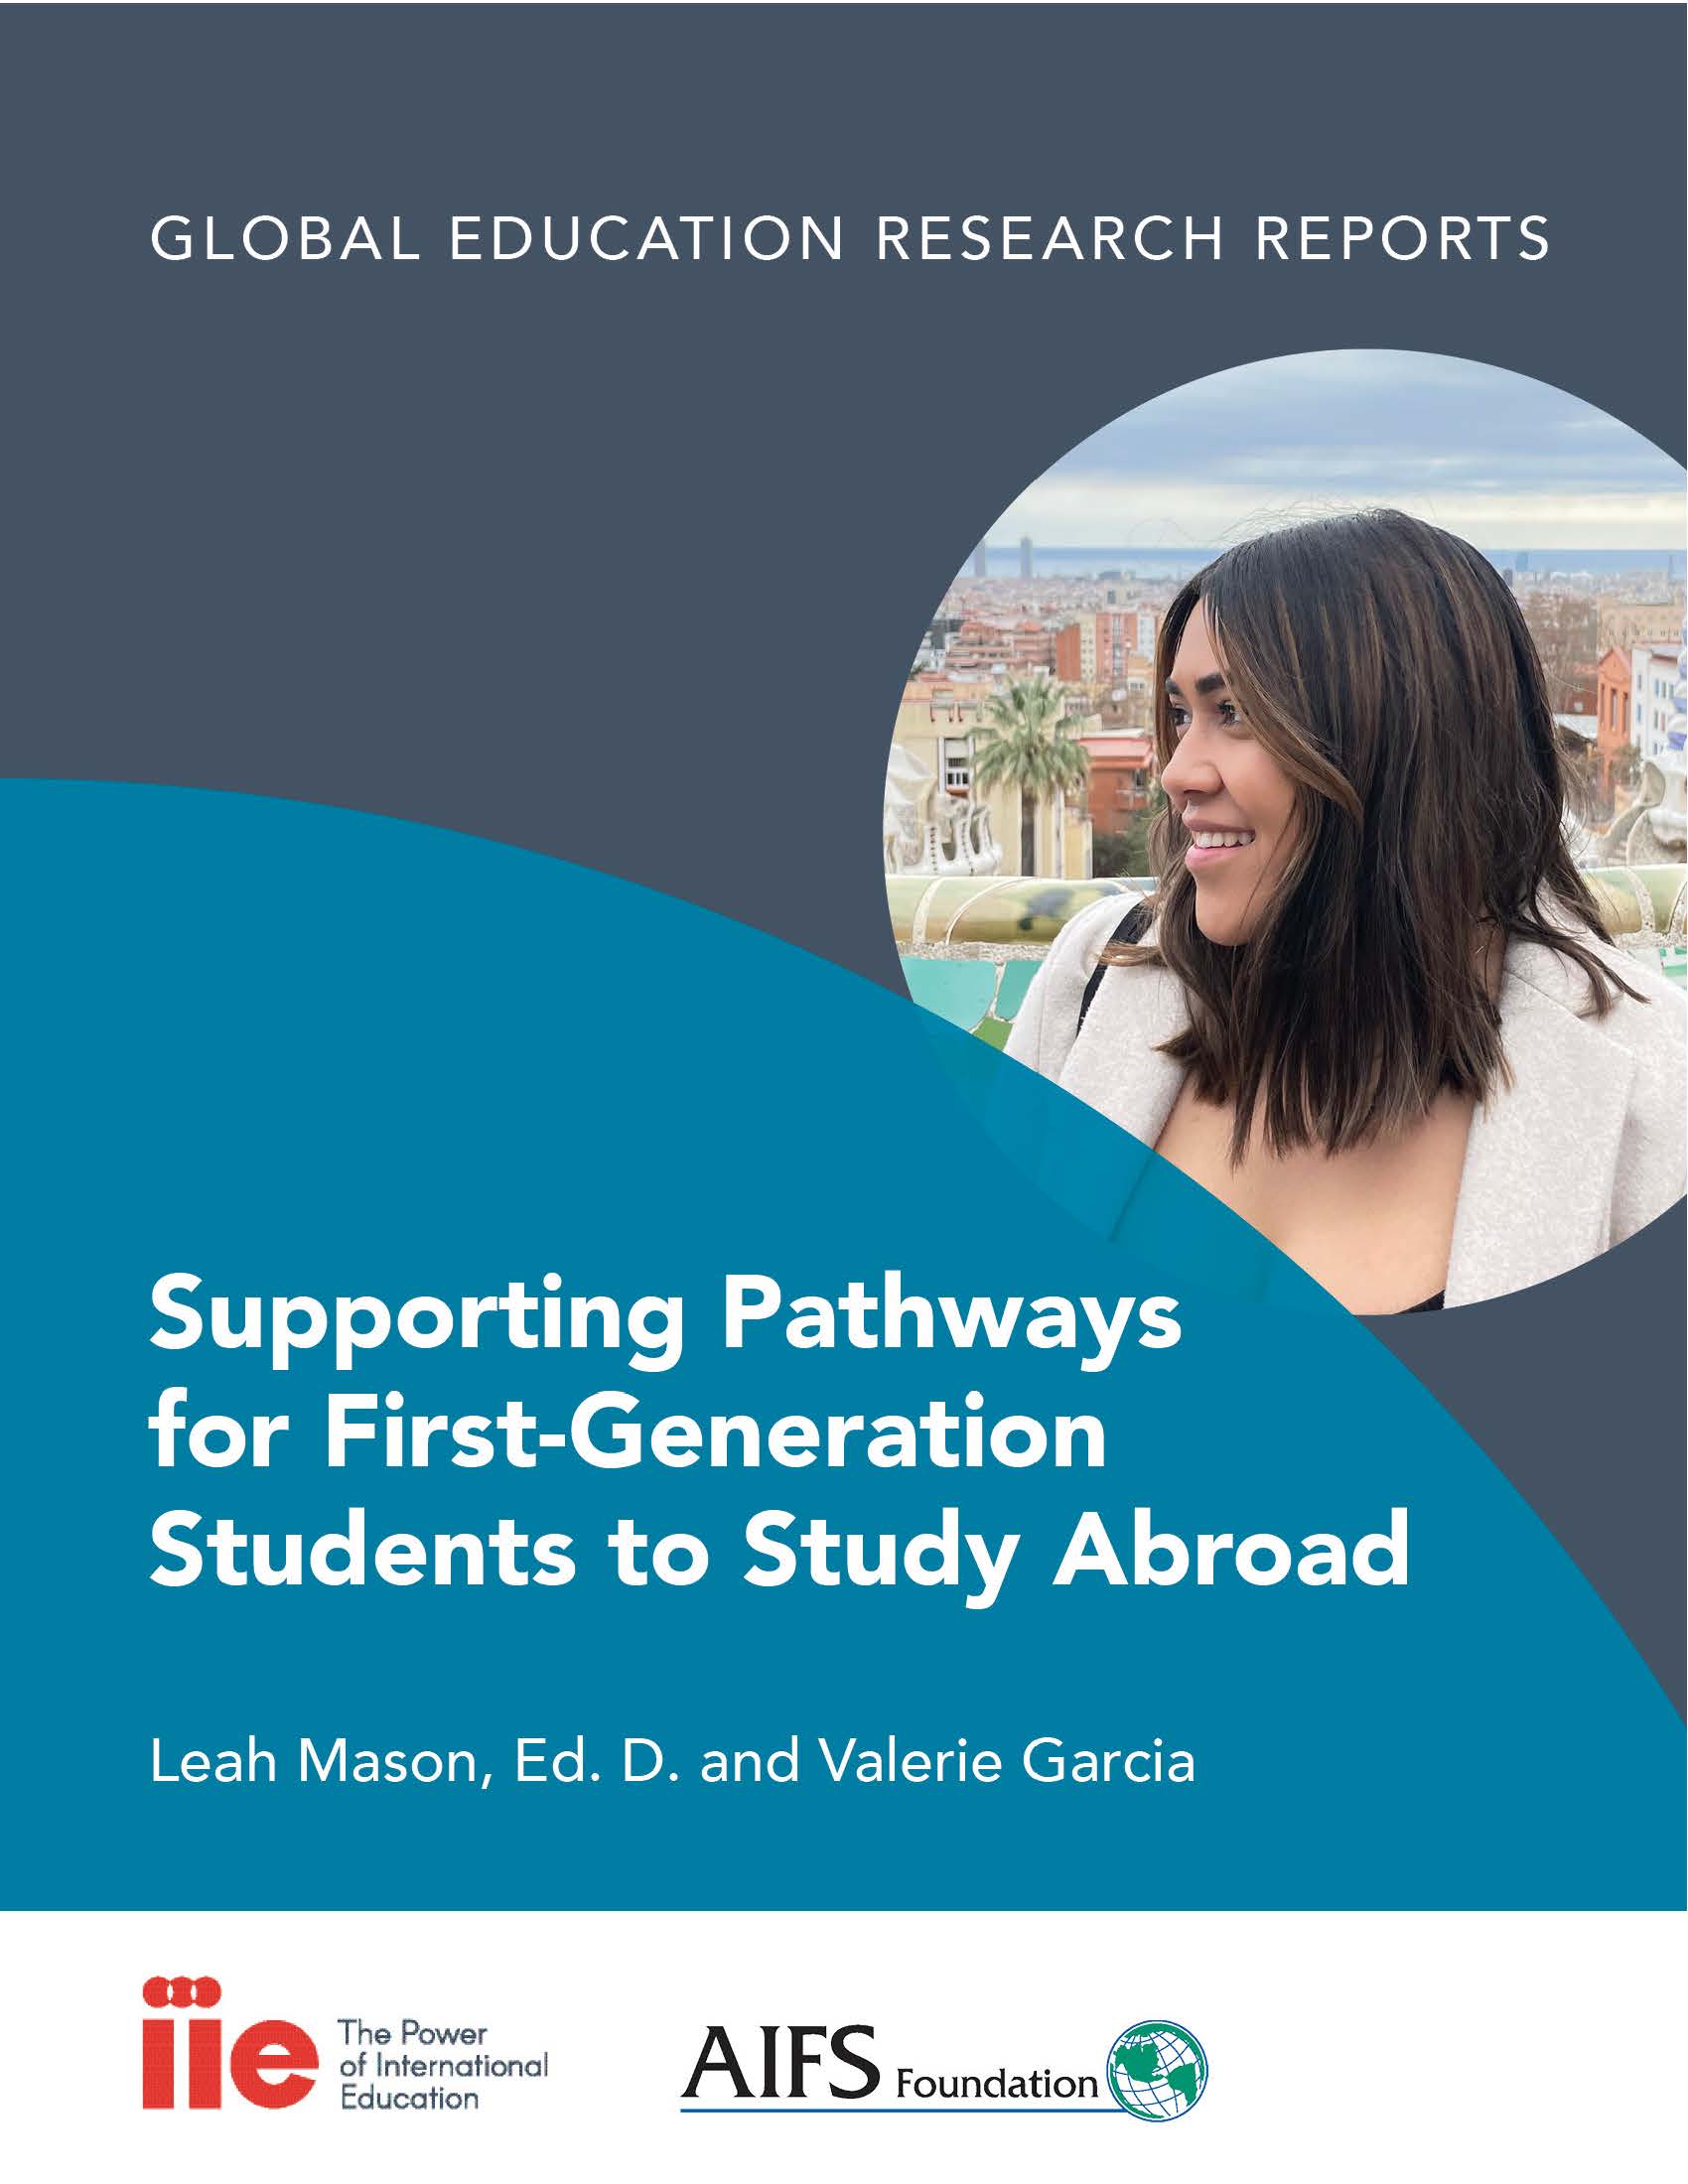 Cover of IIE Publication "Supporting Pathways for First-Generation Students to Study Abroad"